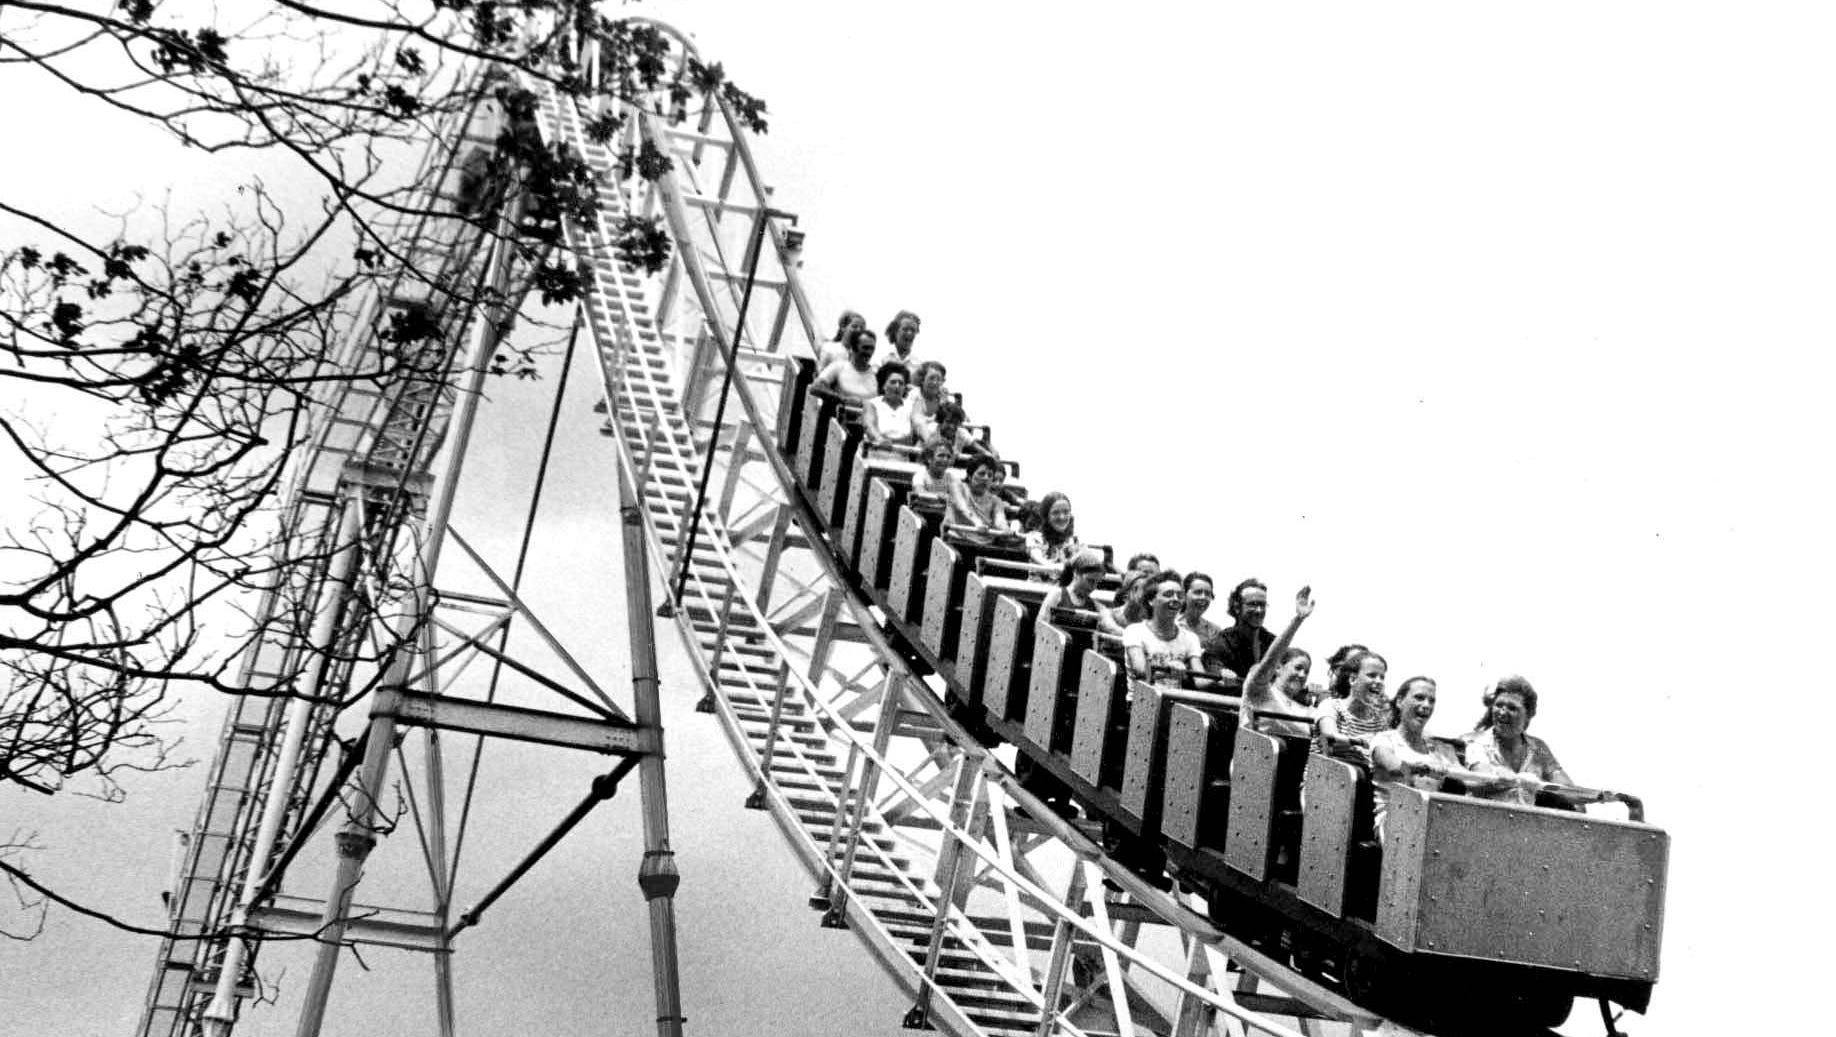 Riders enjoy the Thunder Bolt roller coaster at Boblo Island in July 1975. The coaster was built of steel in 1973.